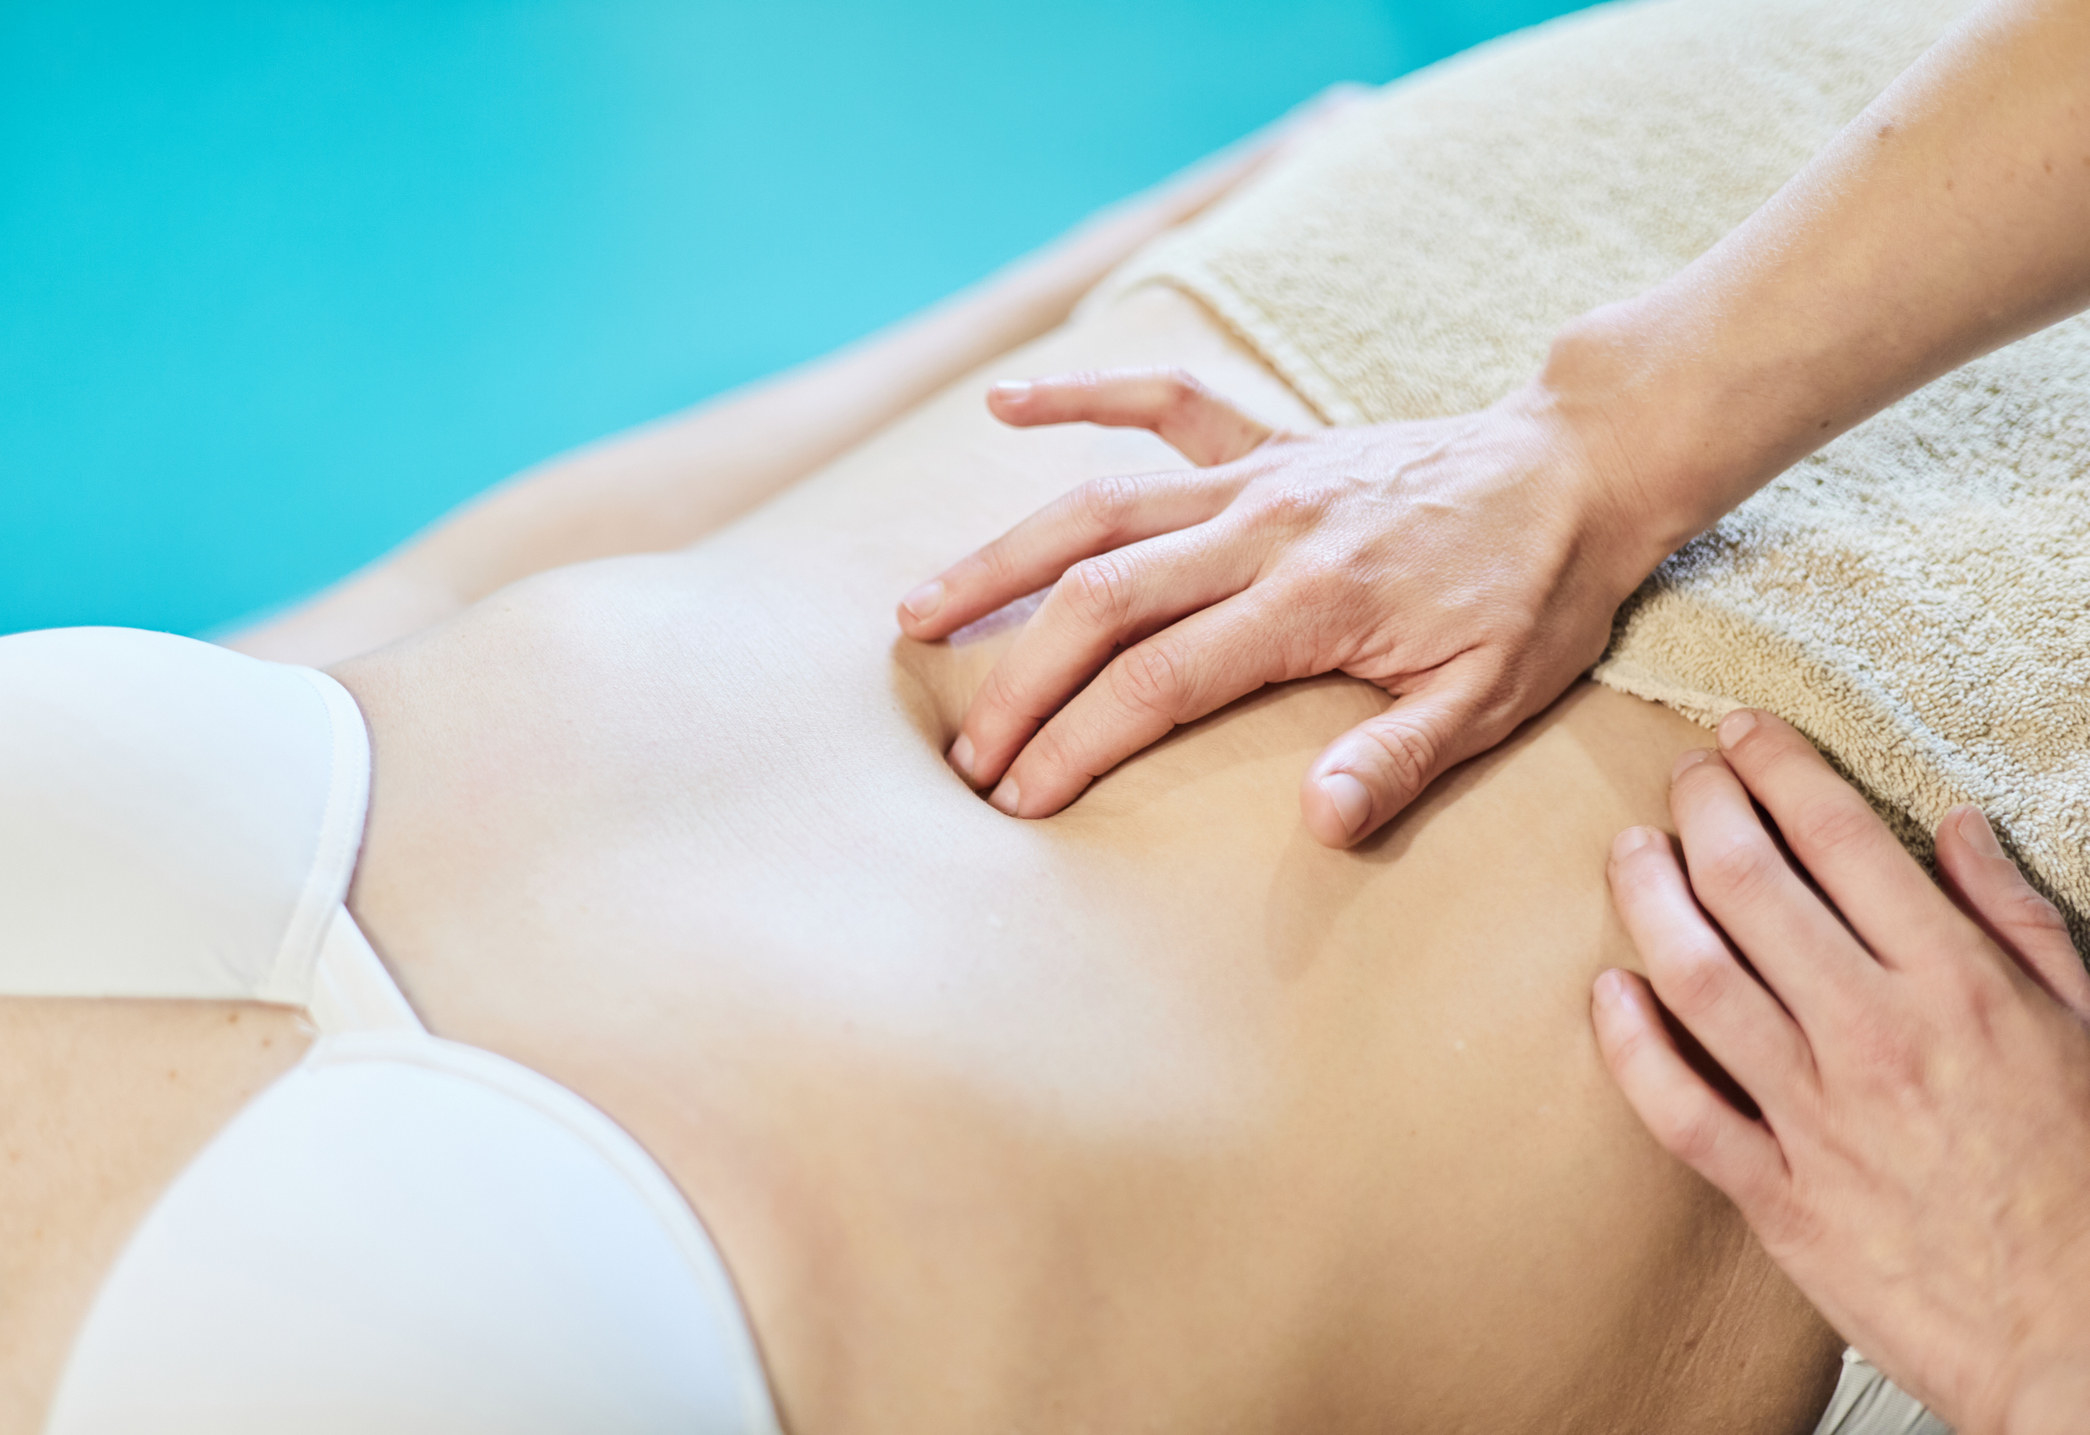 Stock photo of an abdominal massage during physical therapy